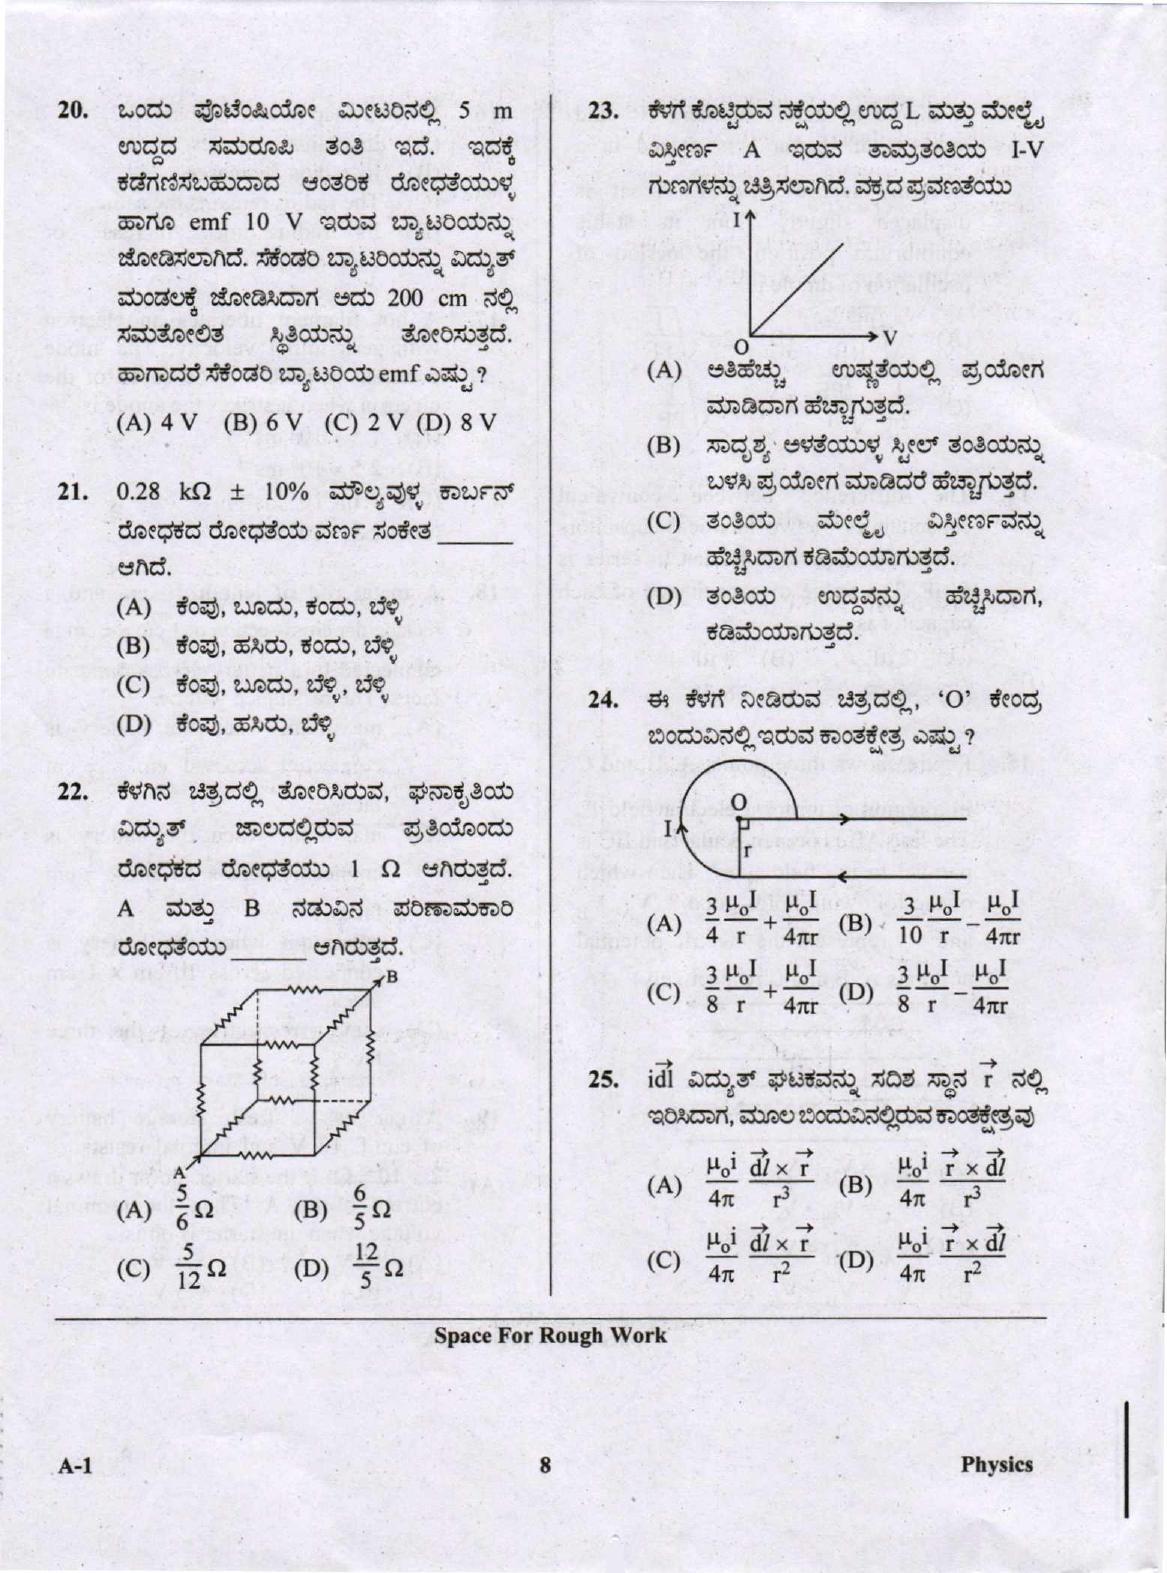 KCET Physics 2020 Question Papers - Page 8